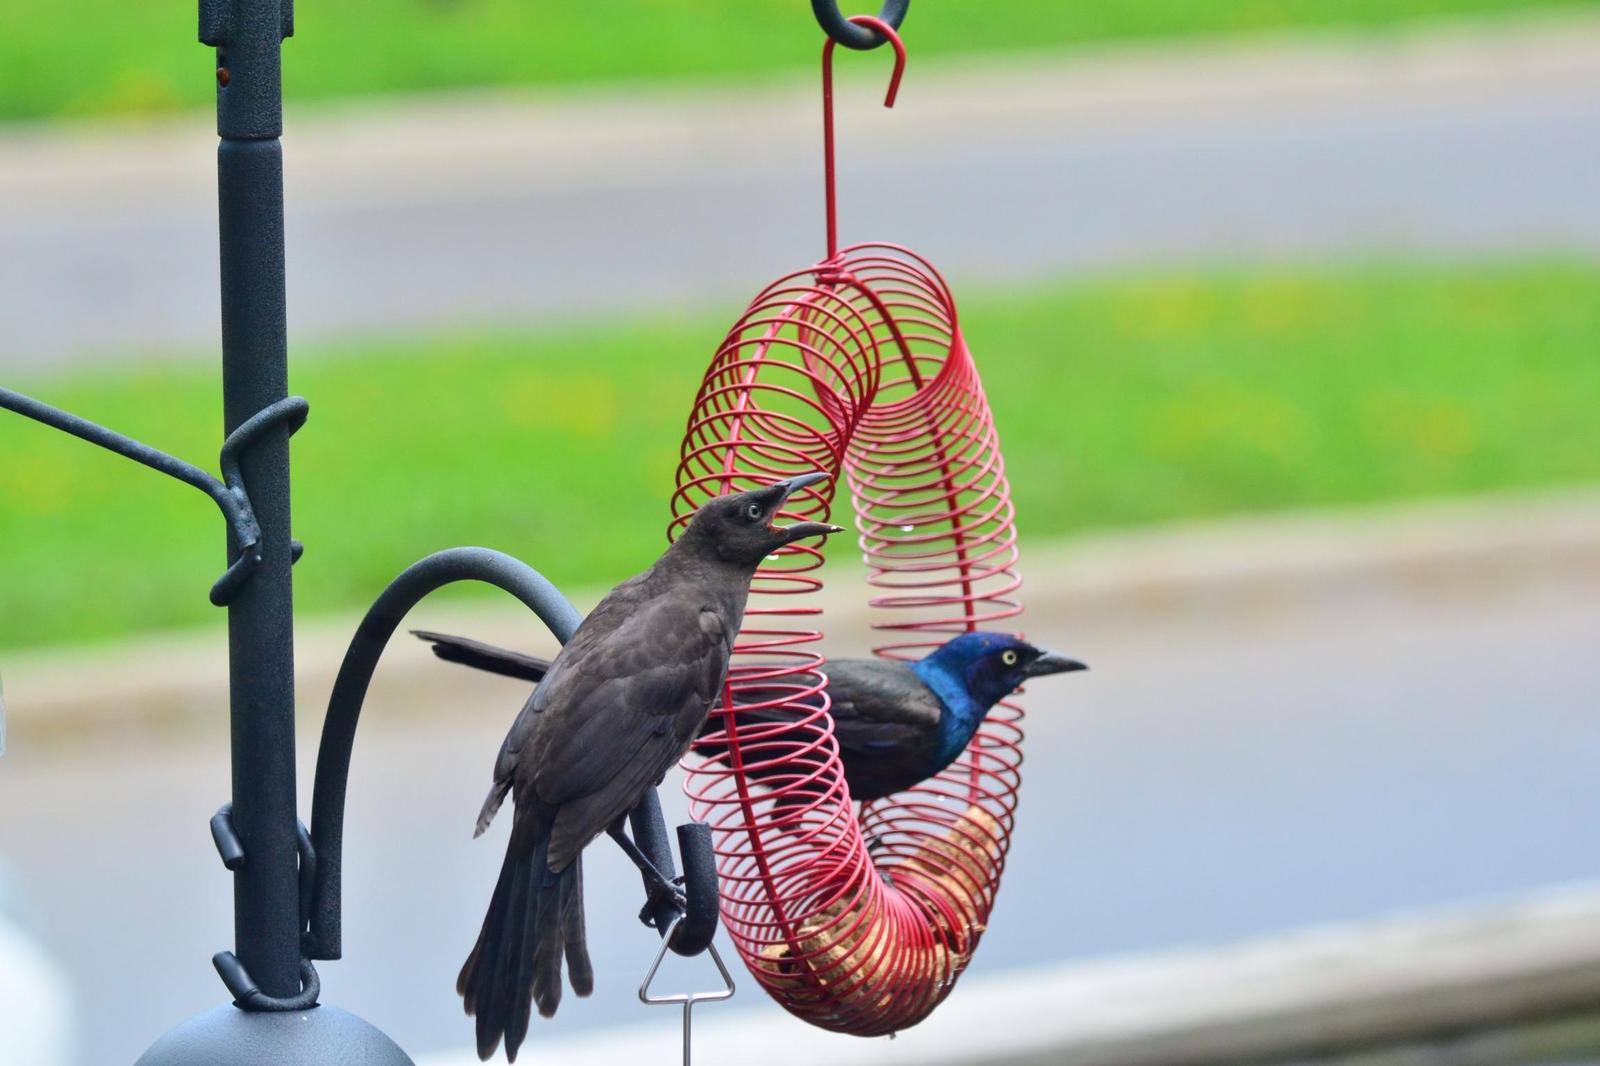 Common Grackle Photo by Linda Cote